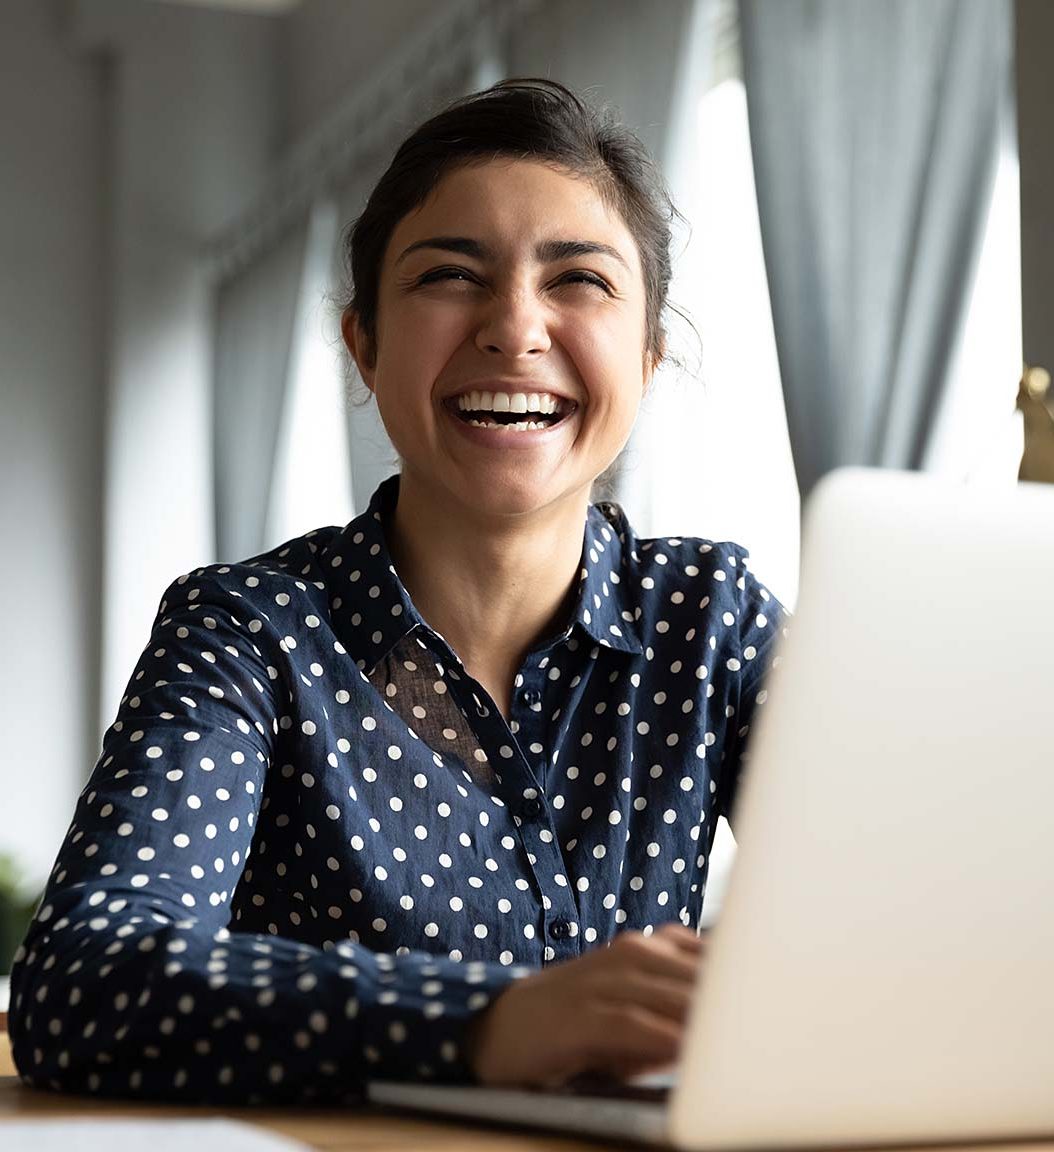 Laughing woman in blue and white polka dot top sits at her laptop in a home.